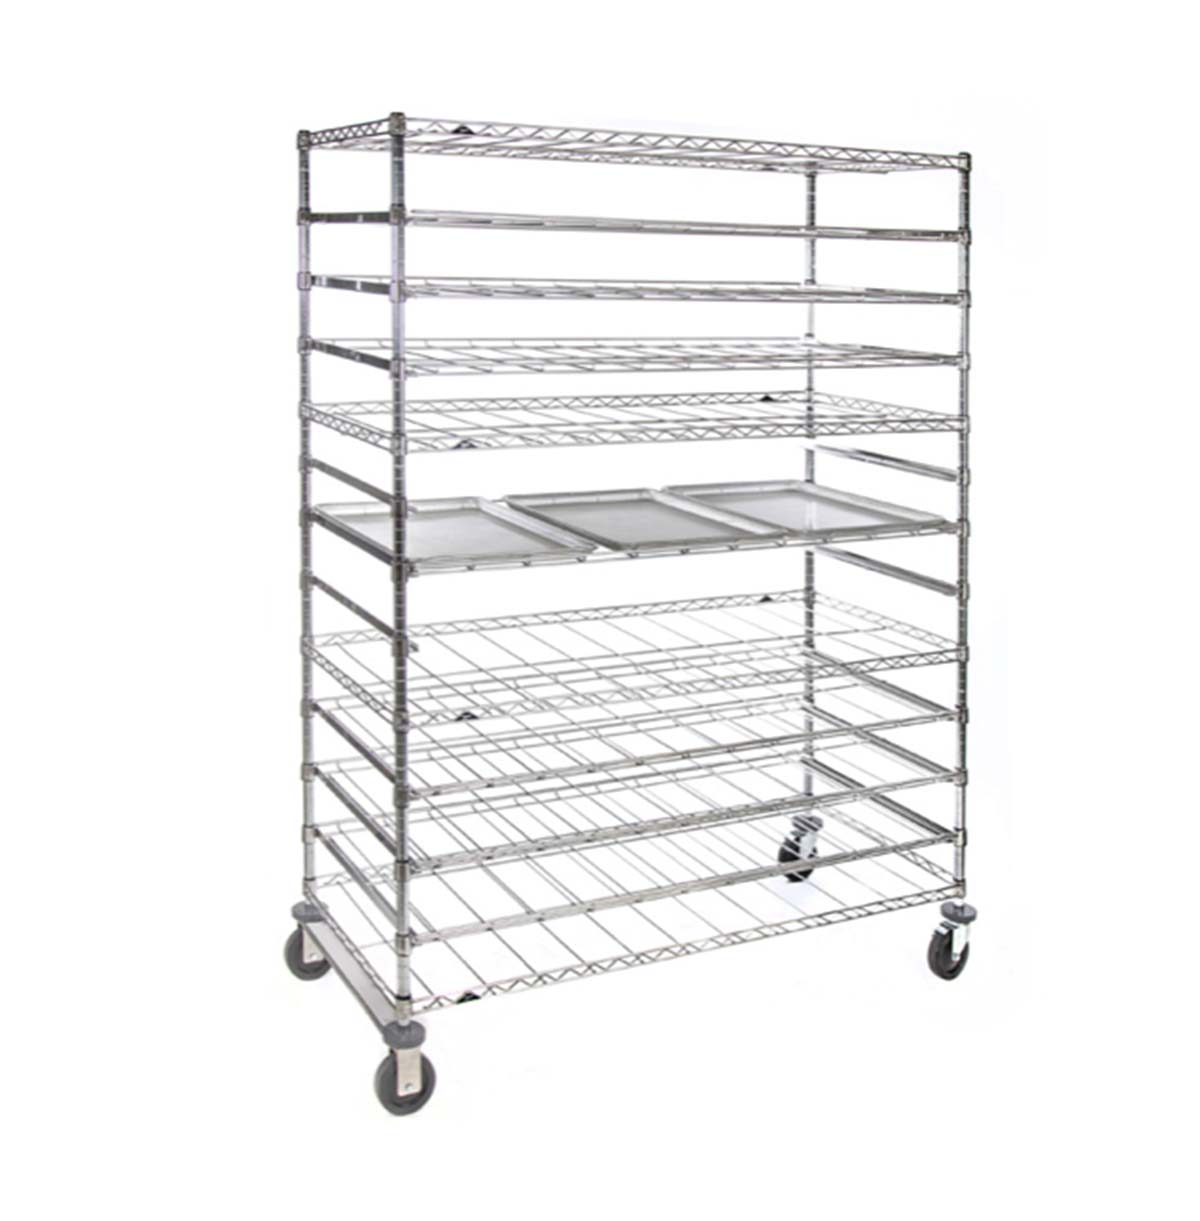 11-Tier Commercial Grade Heavy Duty Steel Wire Shelving Unit in Chrome / Wire Shelving Unit for Restuarant Kitchen